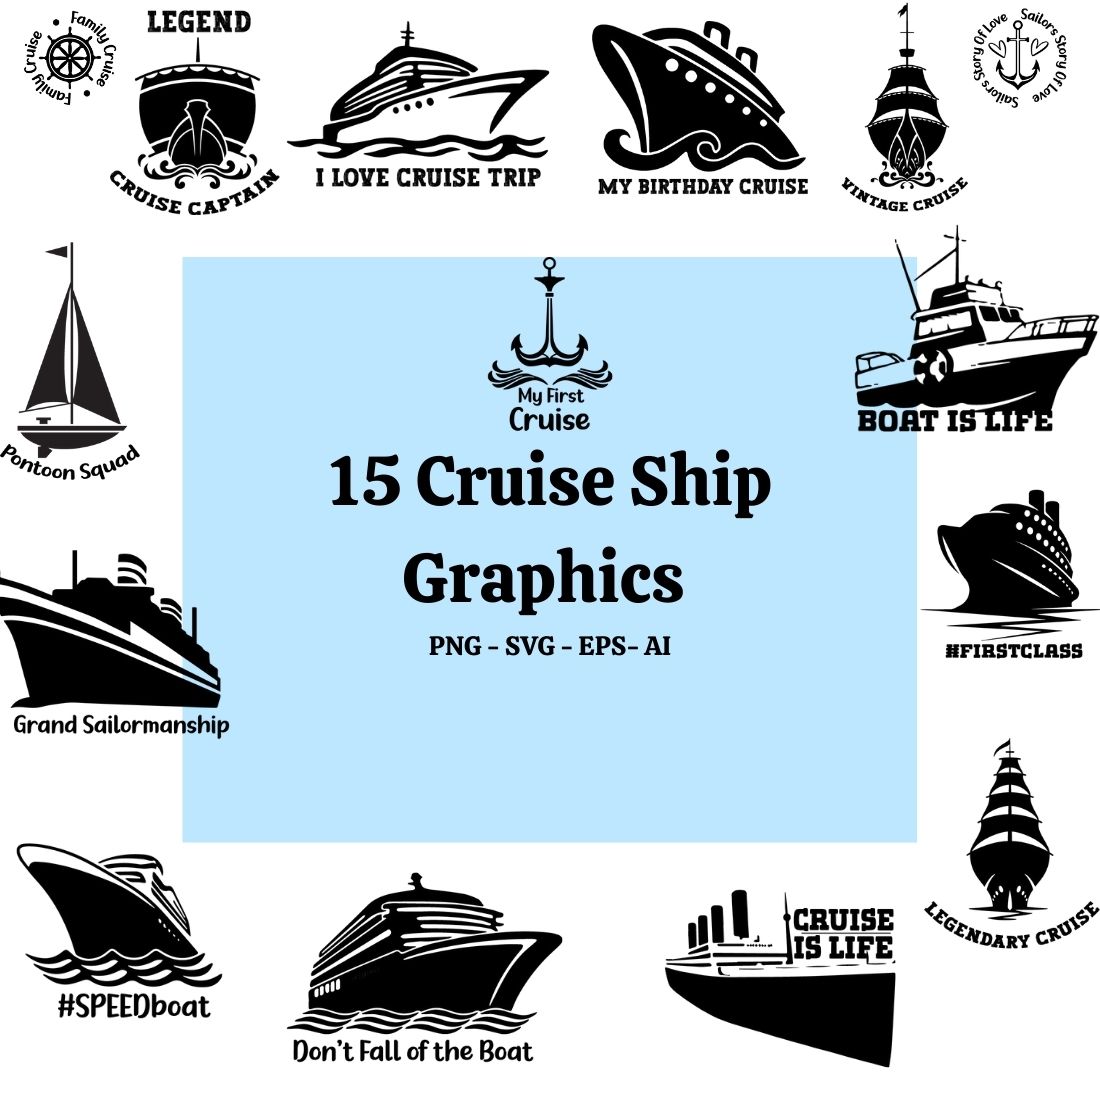 Cruise Ship Graphics Design cover image.